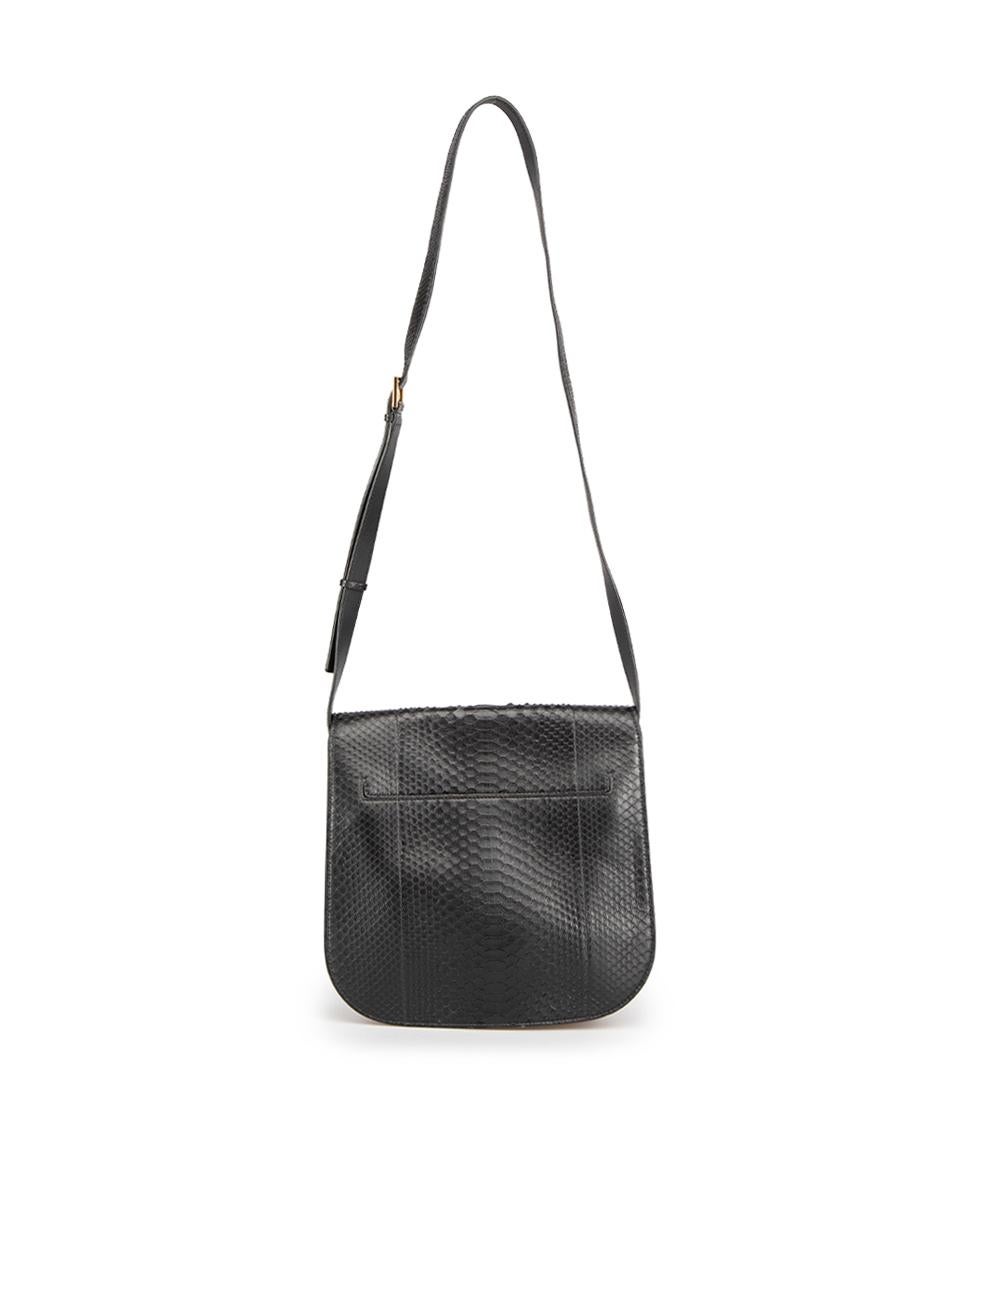 Tom Ford Black T-Plaque Python Leather Crossbody In Excellent Condition For Sale In London, GB